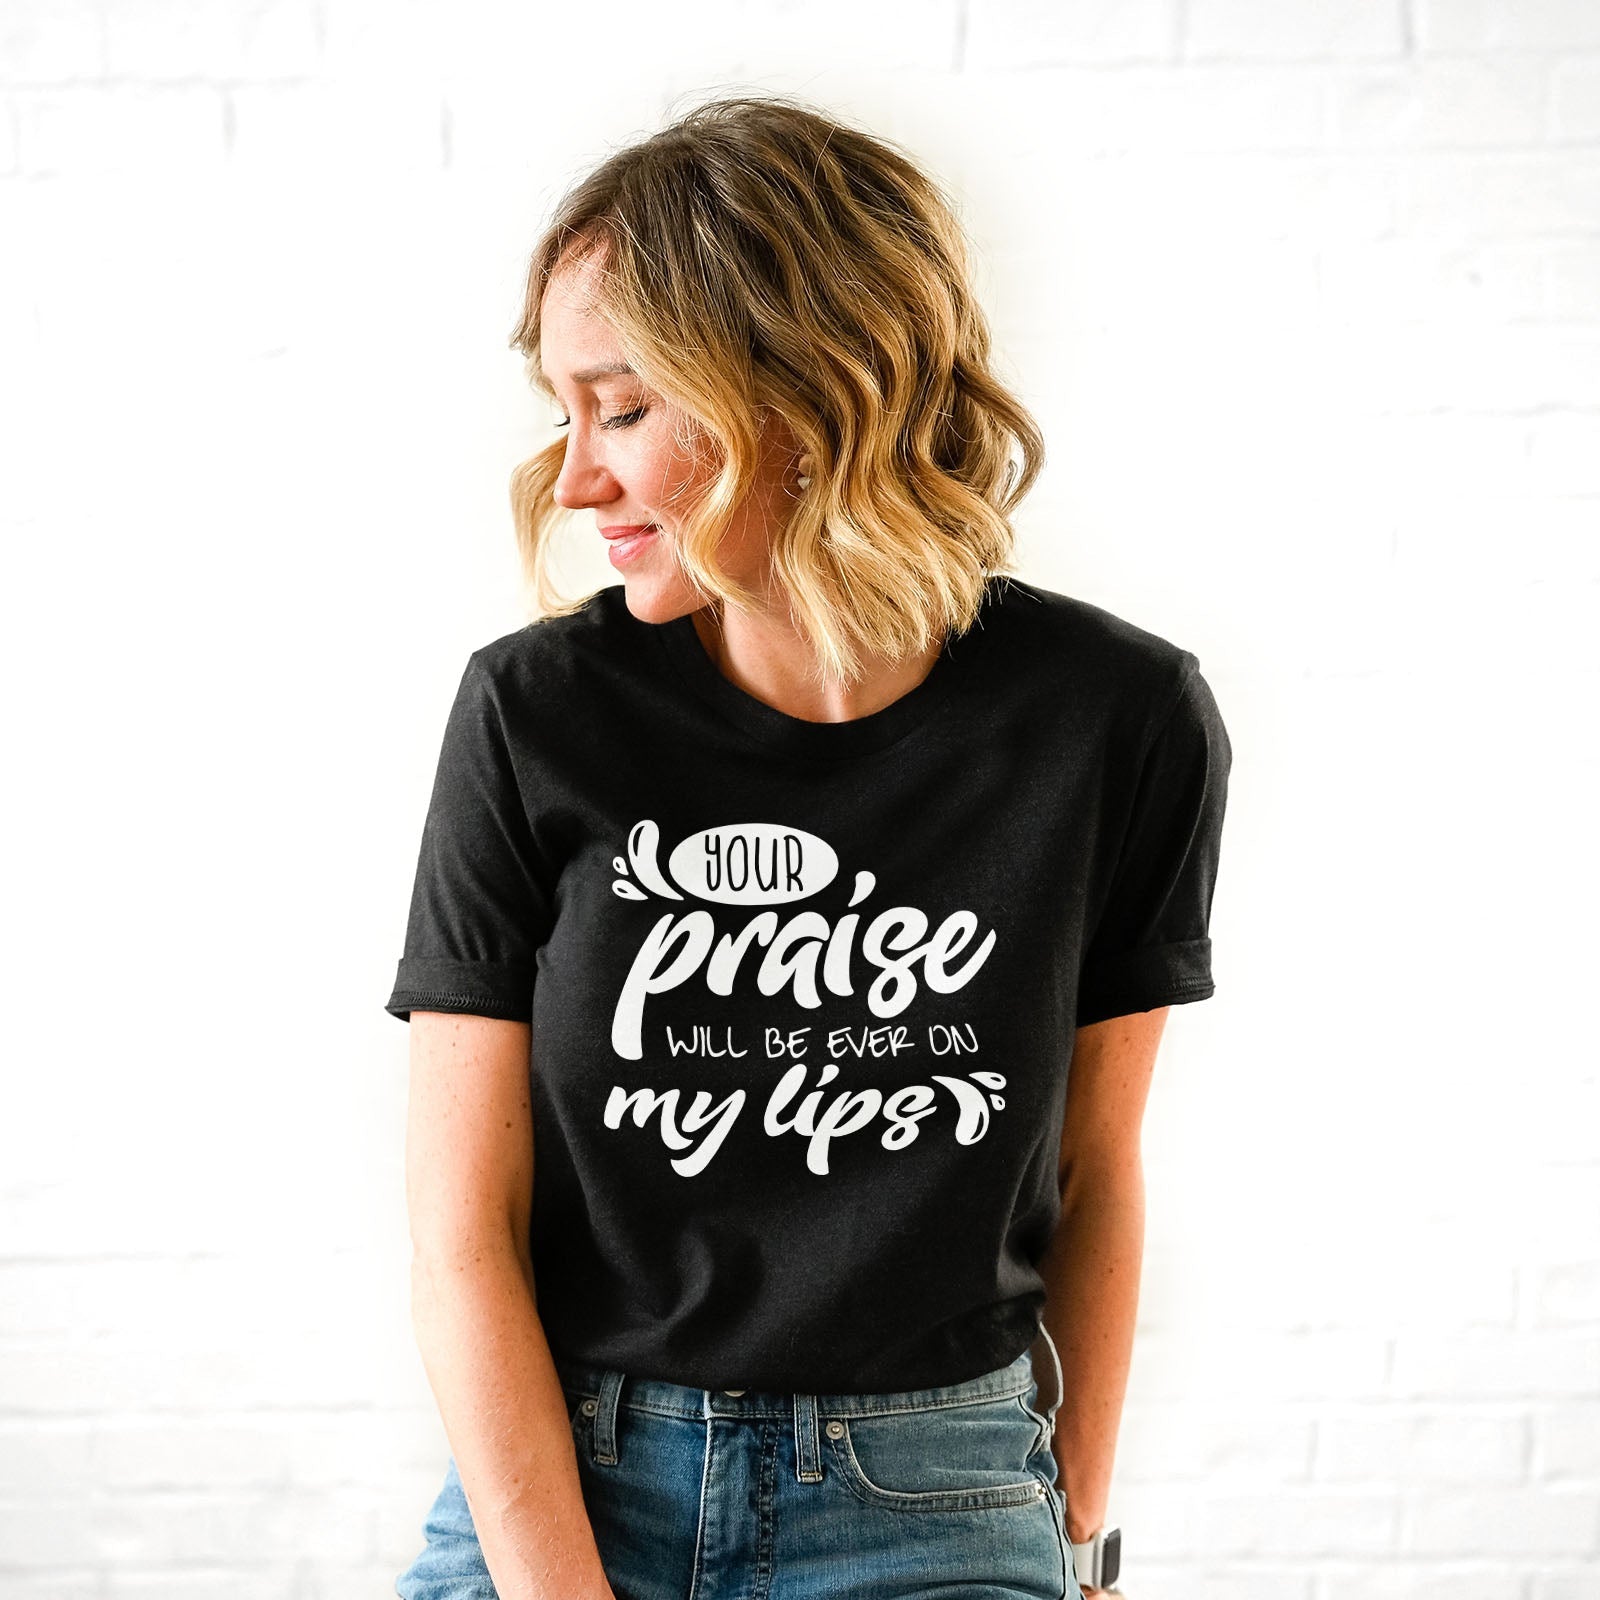 Your Praise Will Be Ever On My Lips Tee Shirts For Women - Christian Shirts for Women - Religious Tee Shirts